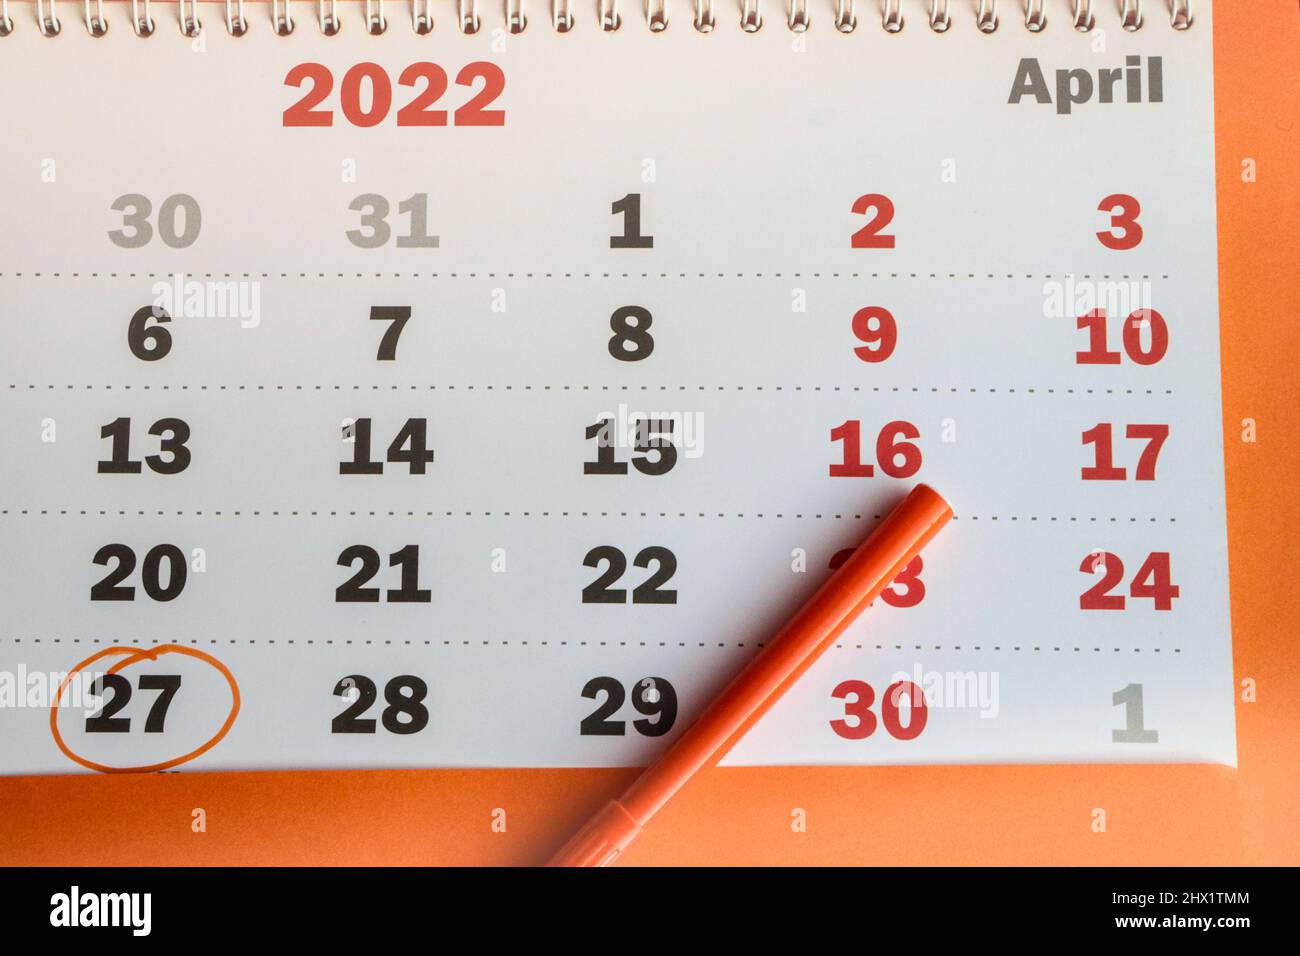 A close-up reminder of the memorable date recorded in the calendar on APRIL 27, a white paper calendar on an orange background with an orange marker. Stock Photo